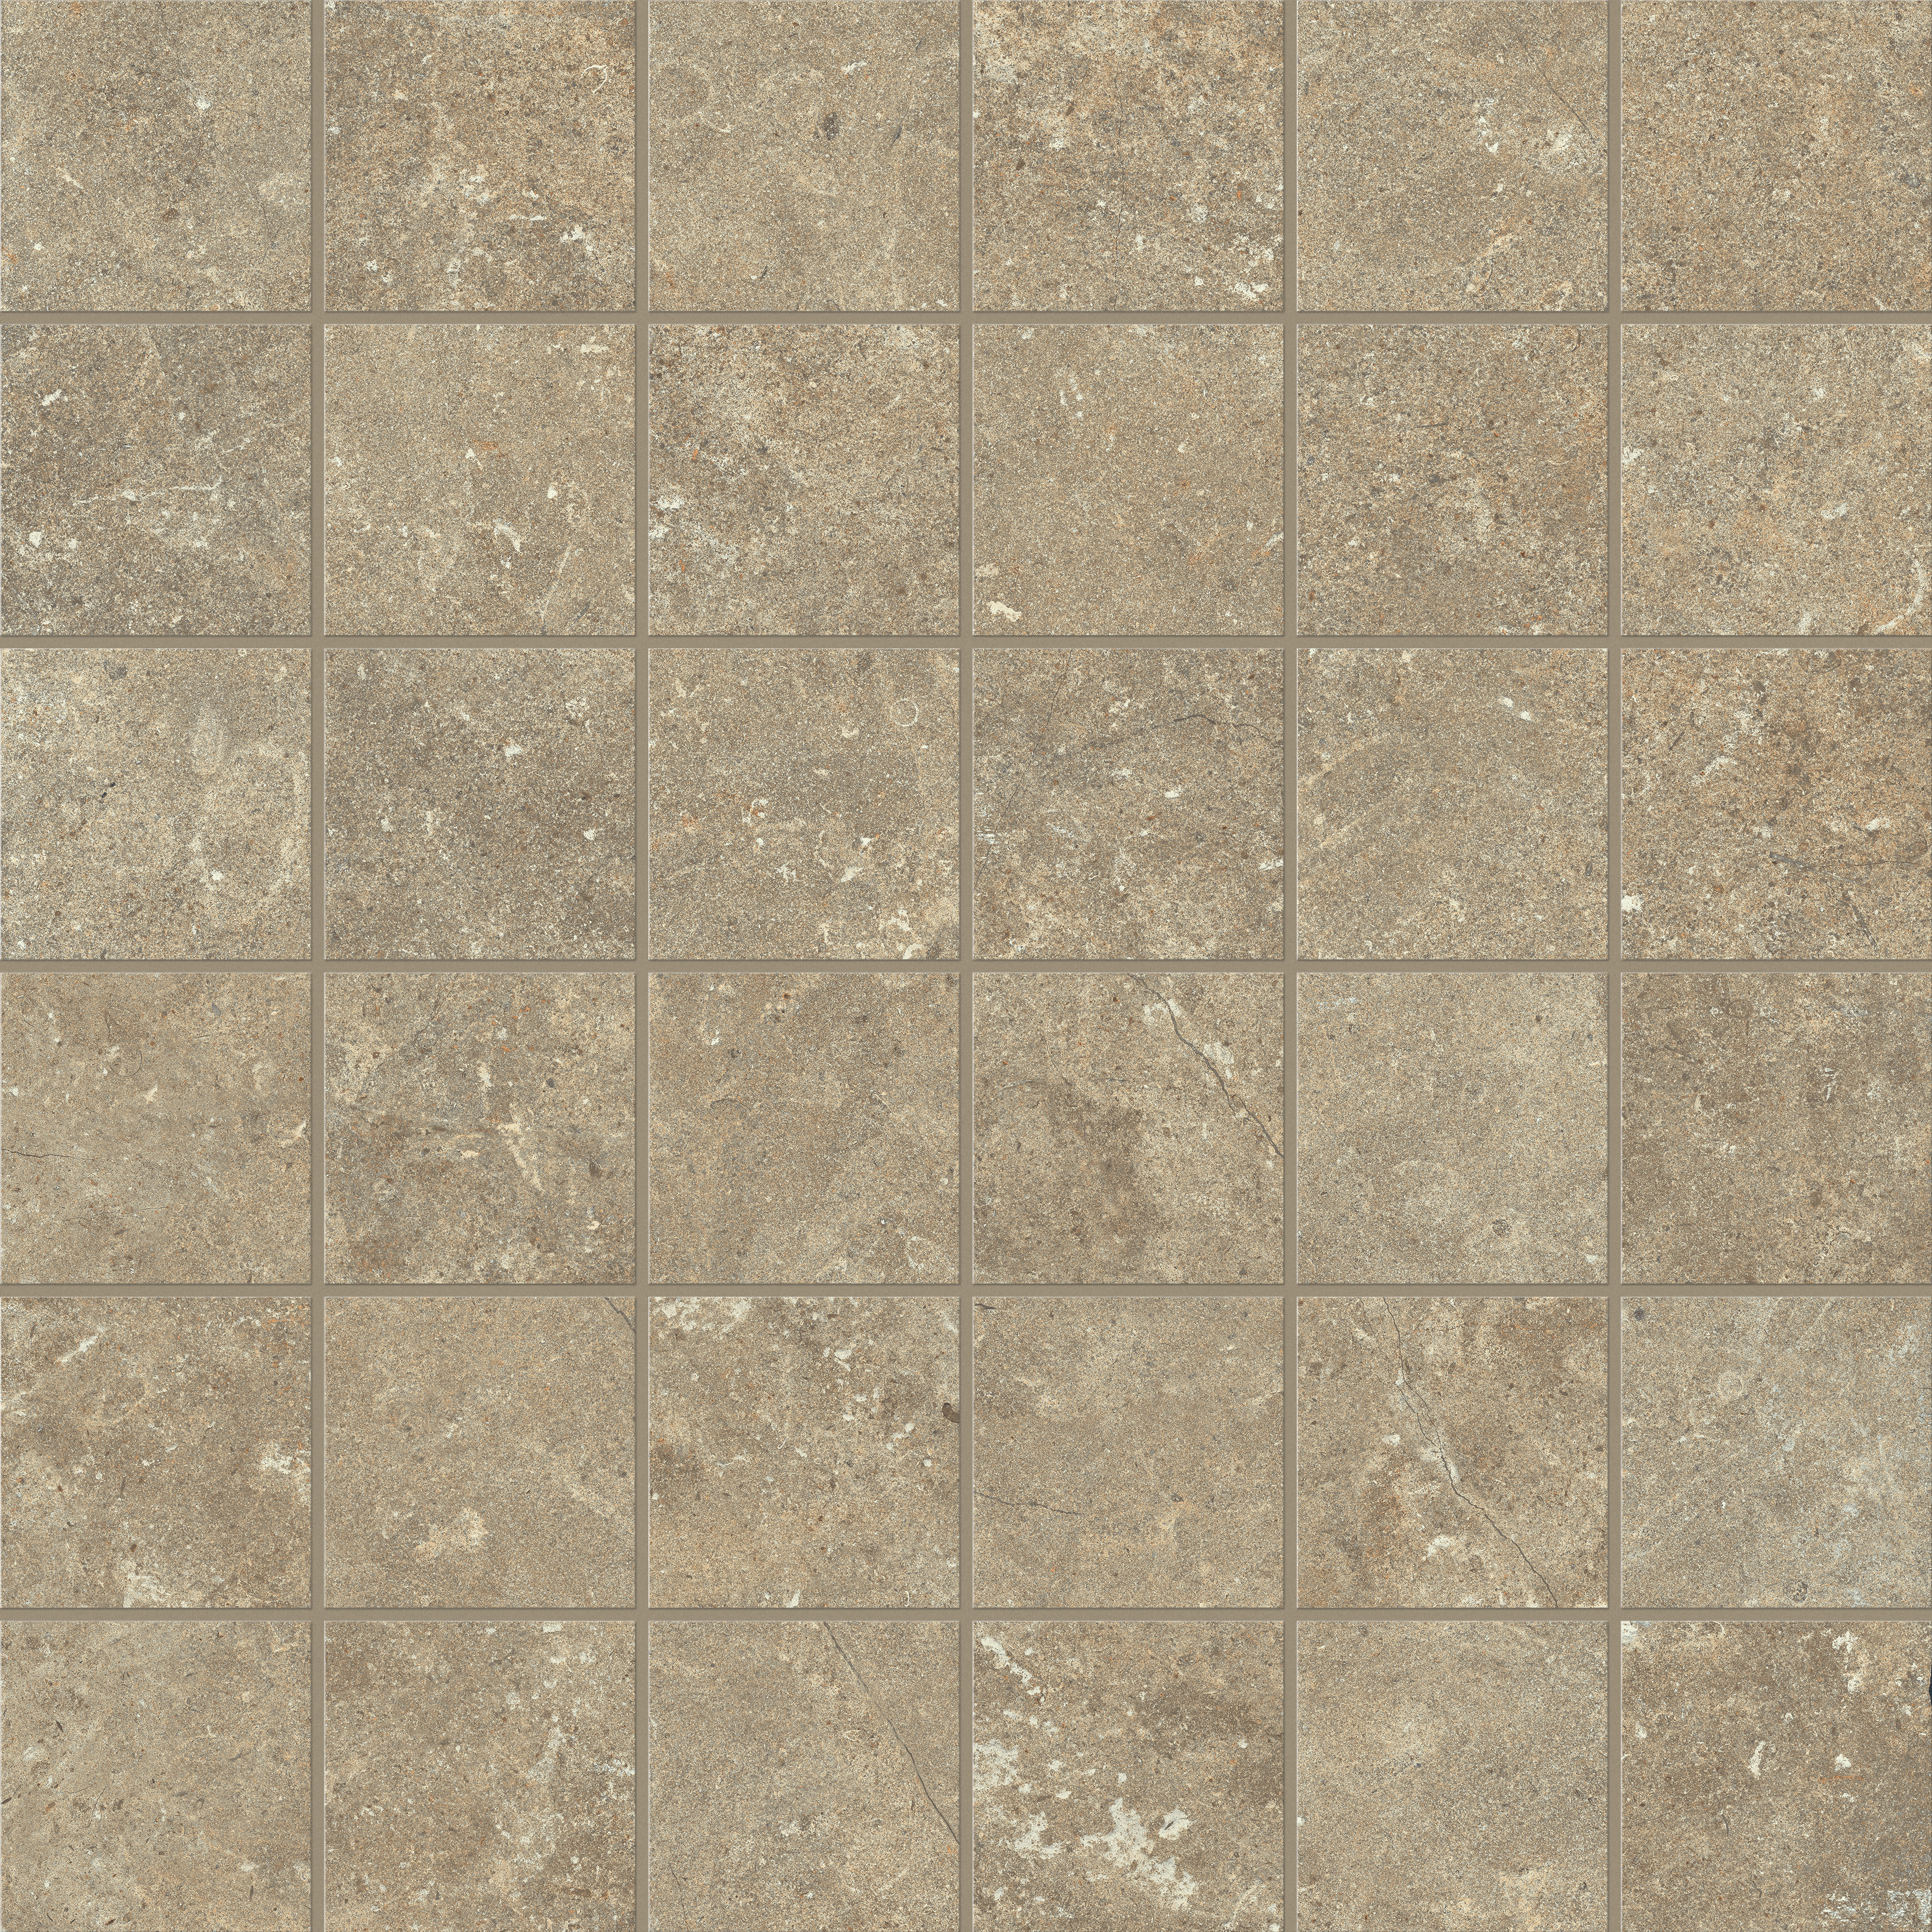 Marca Corona Arkistyle Earth Strutturato Hithick Tessere J237 strutturato hithick 30x30cm rectified 9mm